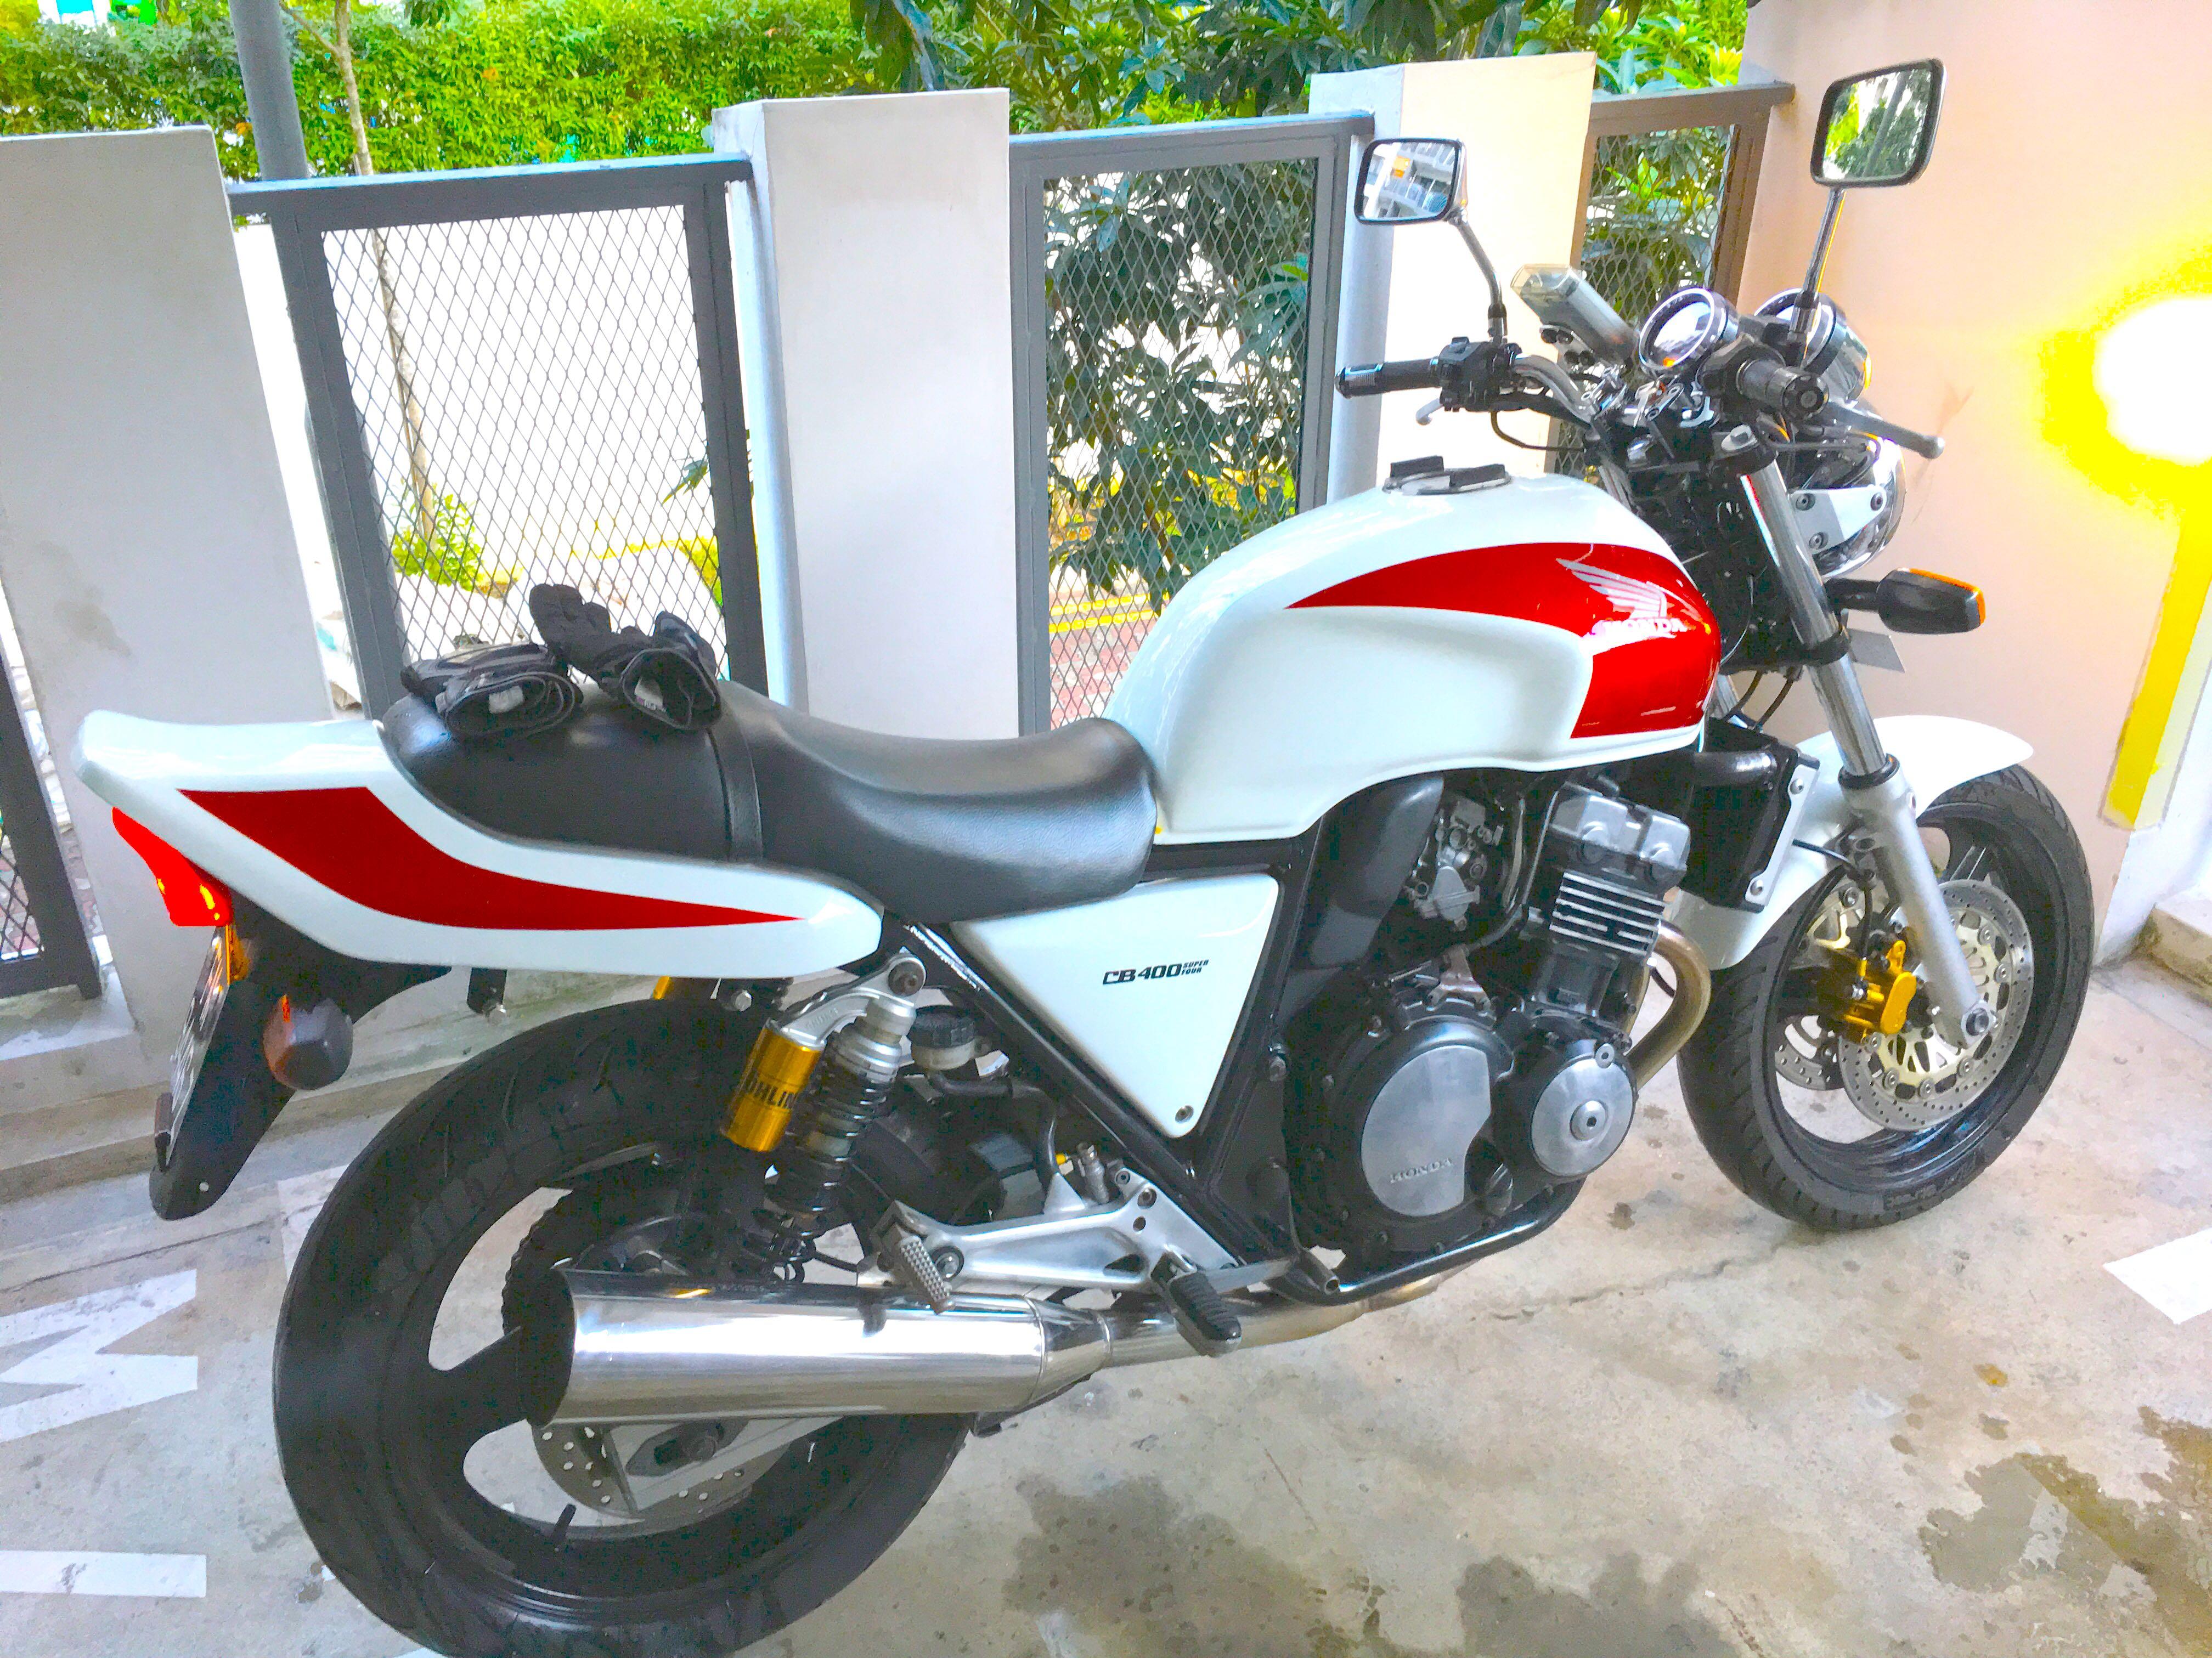 Cb400 Super 4 Project Big 1 Motorcycles Motorcycles For Sale Class 2a On Carousell